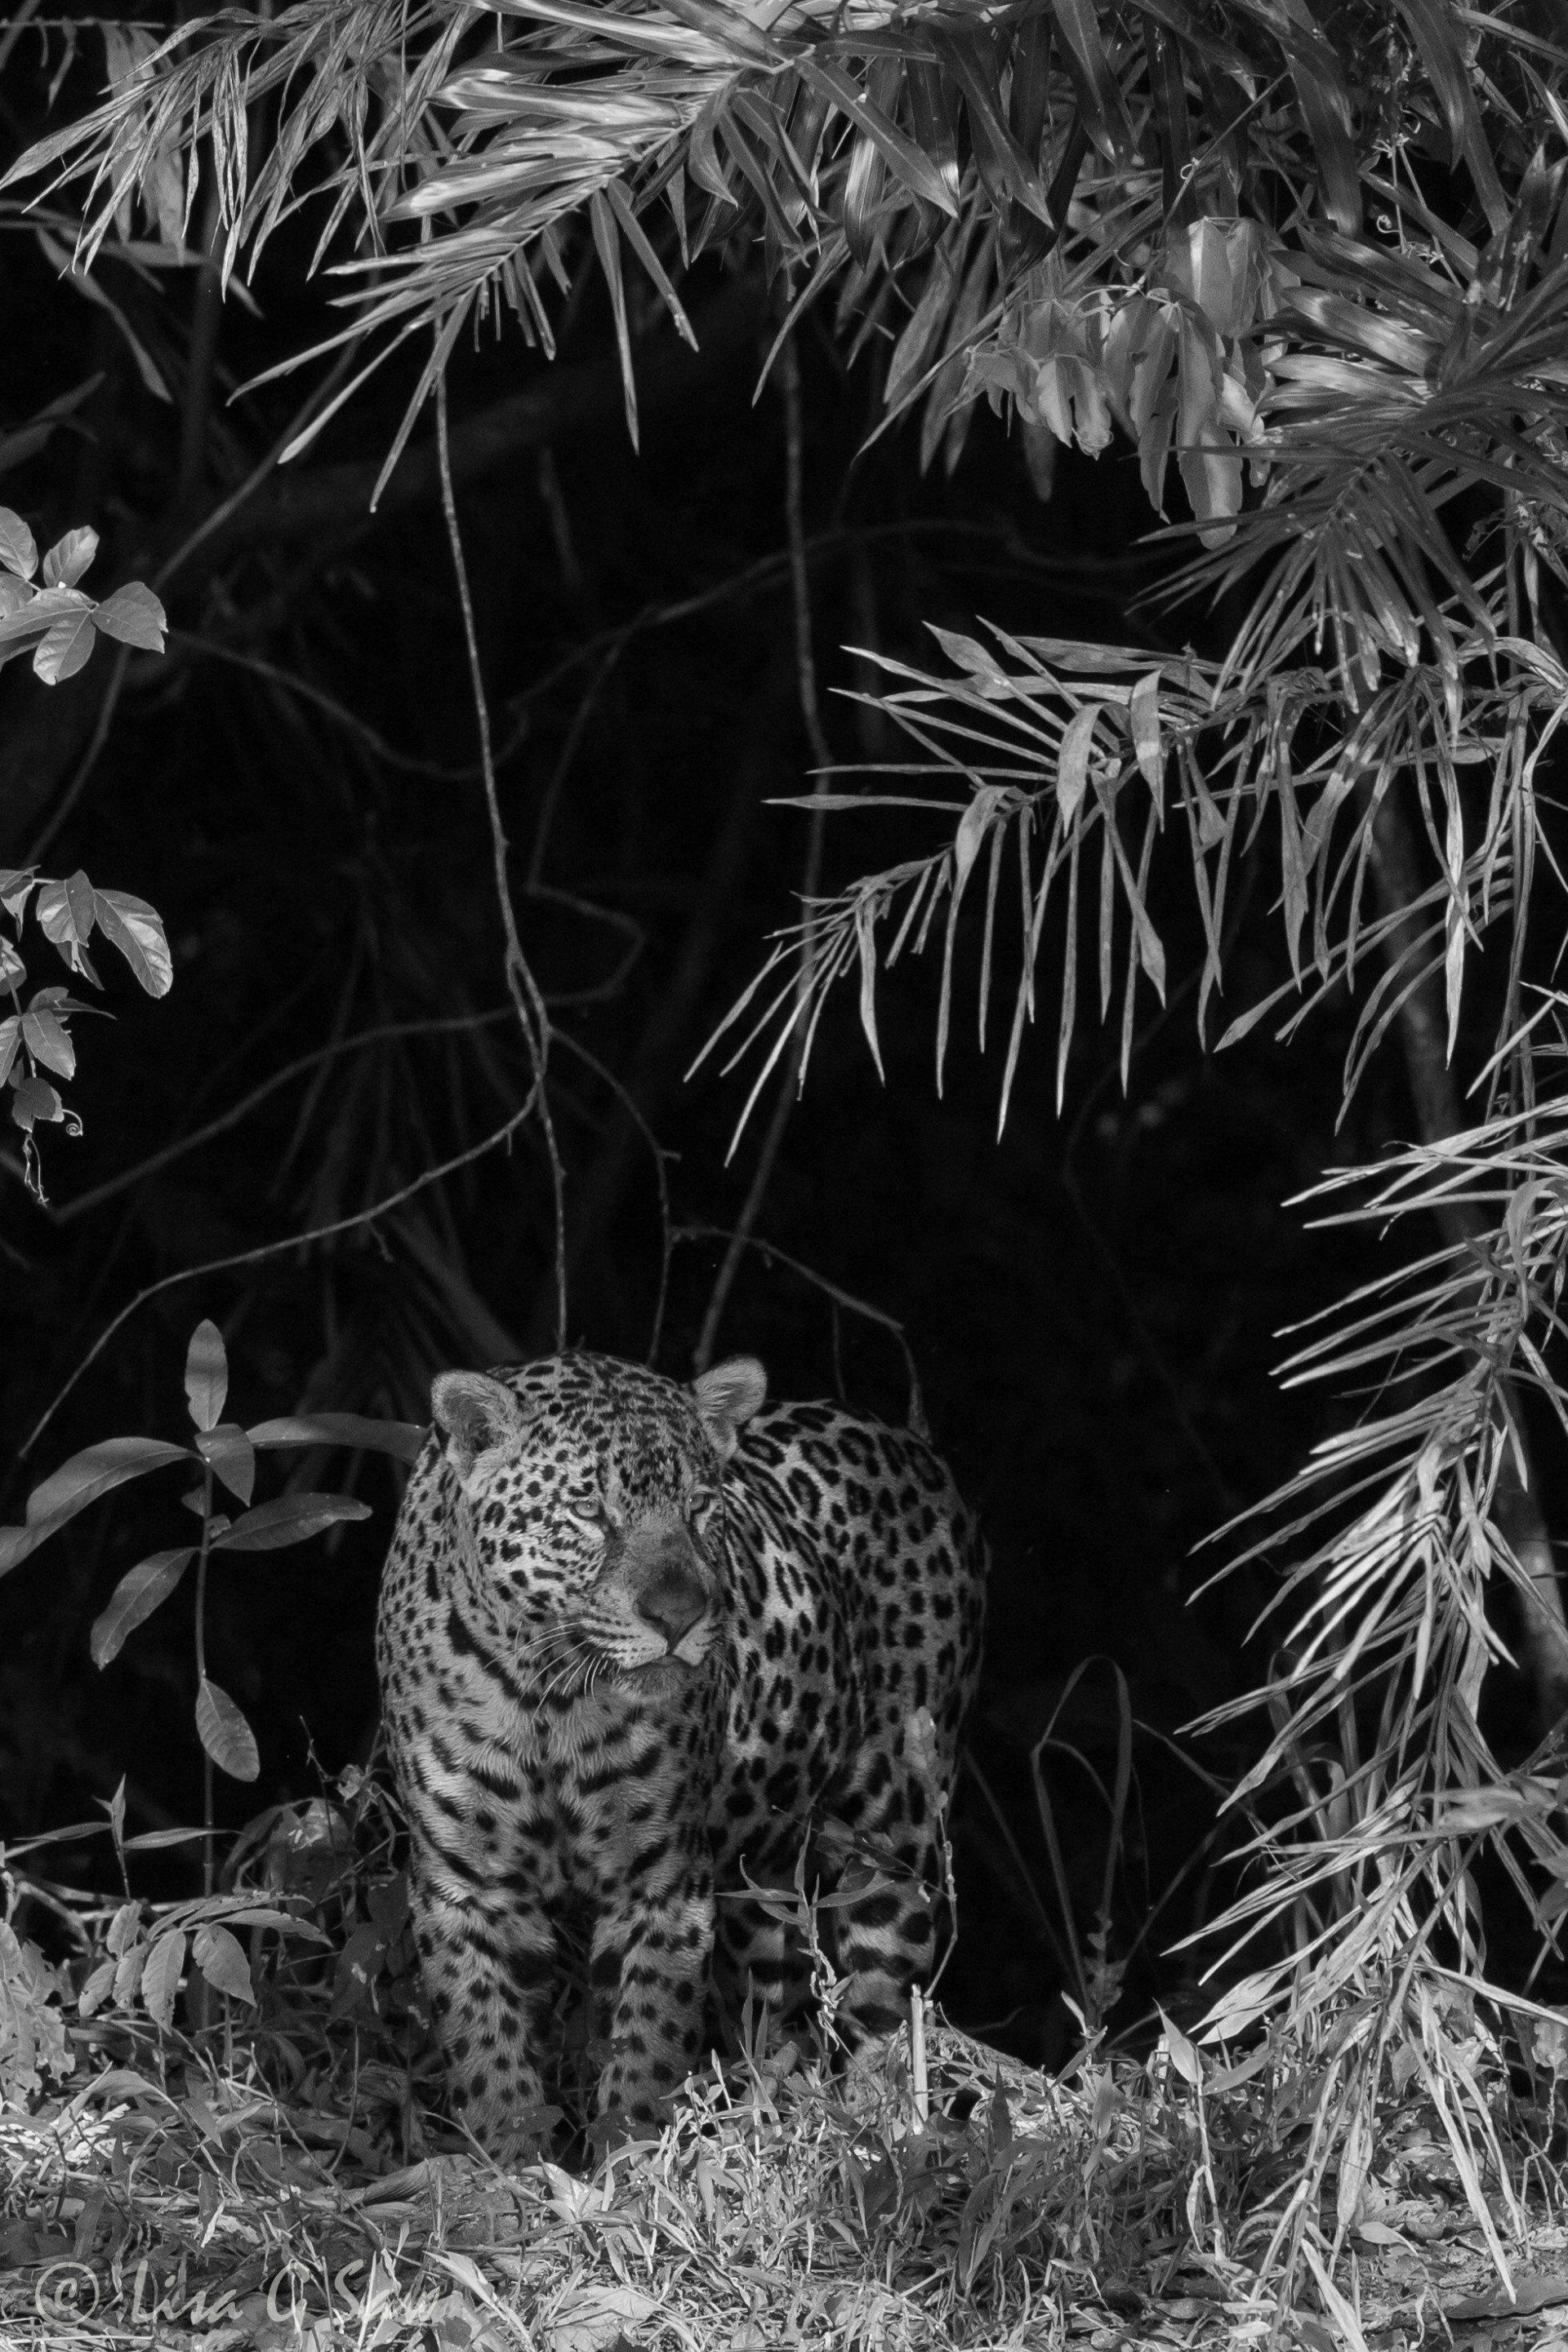 Jaguar appearing in gap in trees (black and white)